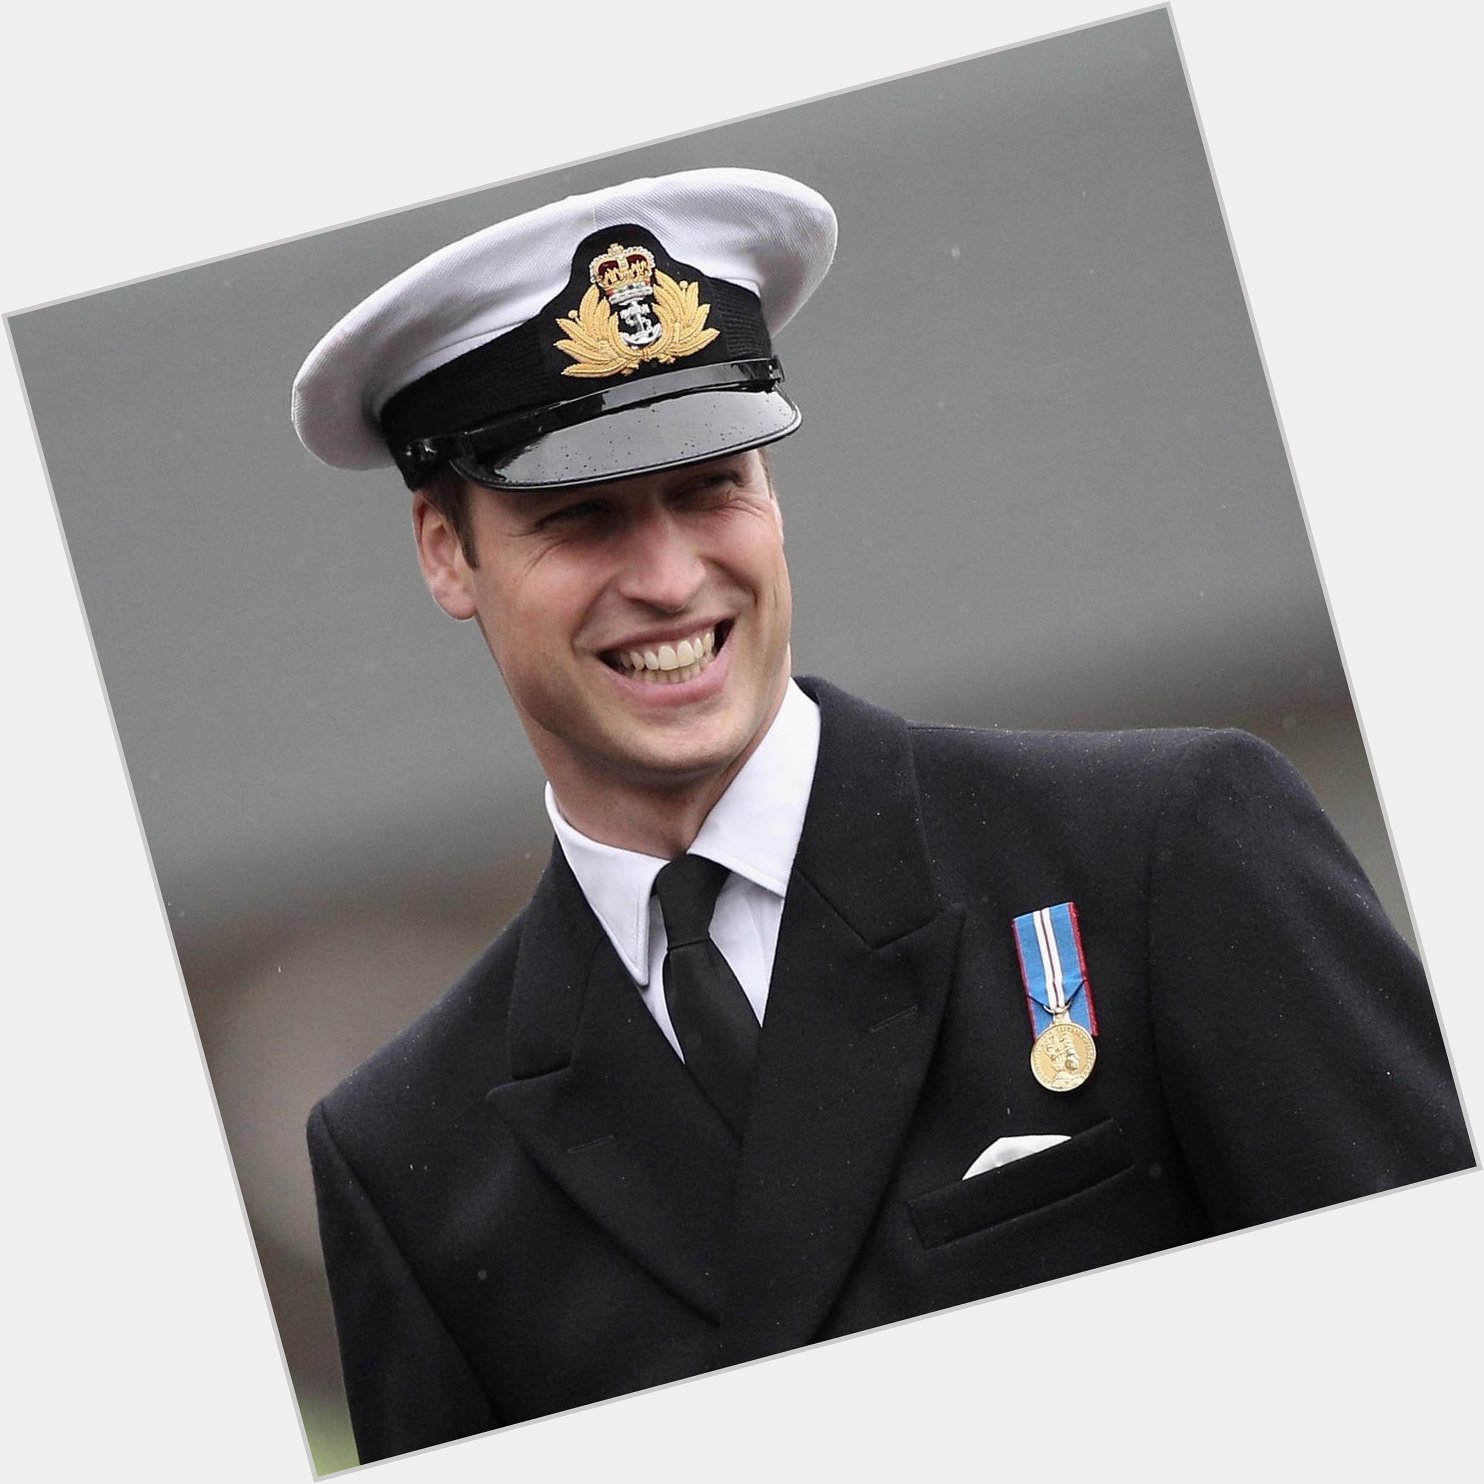 We\re wishing His Royal Highness, the Duke of Cambridge, Prince William, a very happy 37th birthday today. 